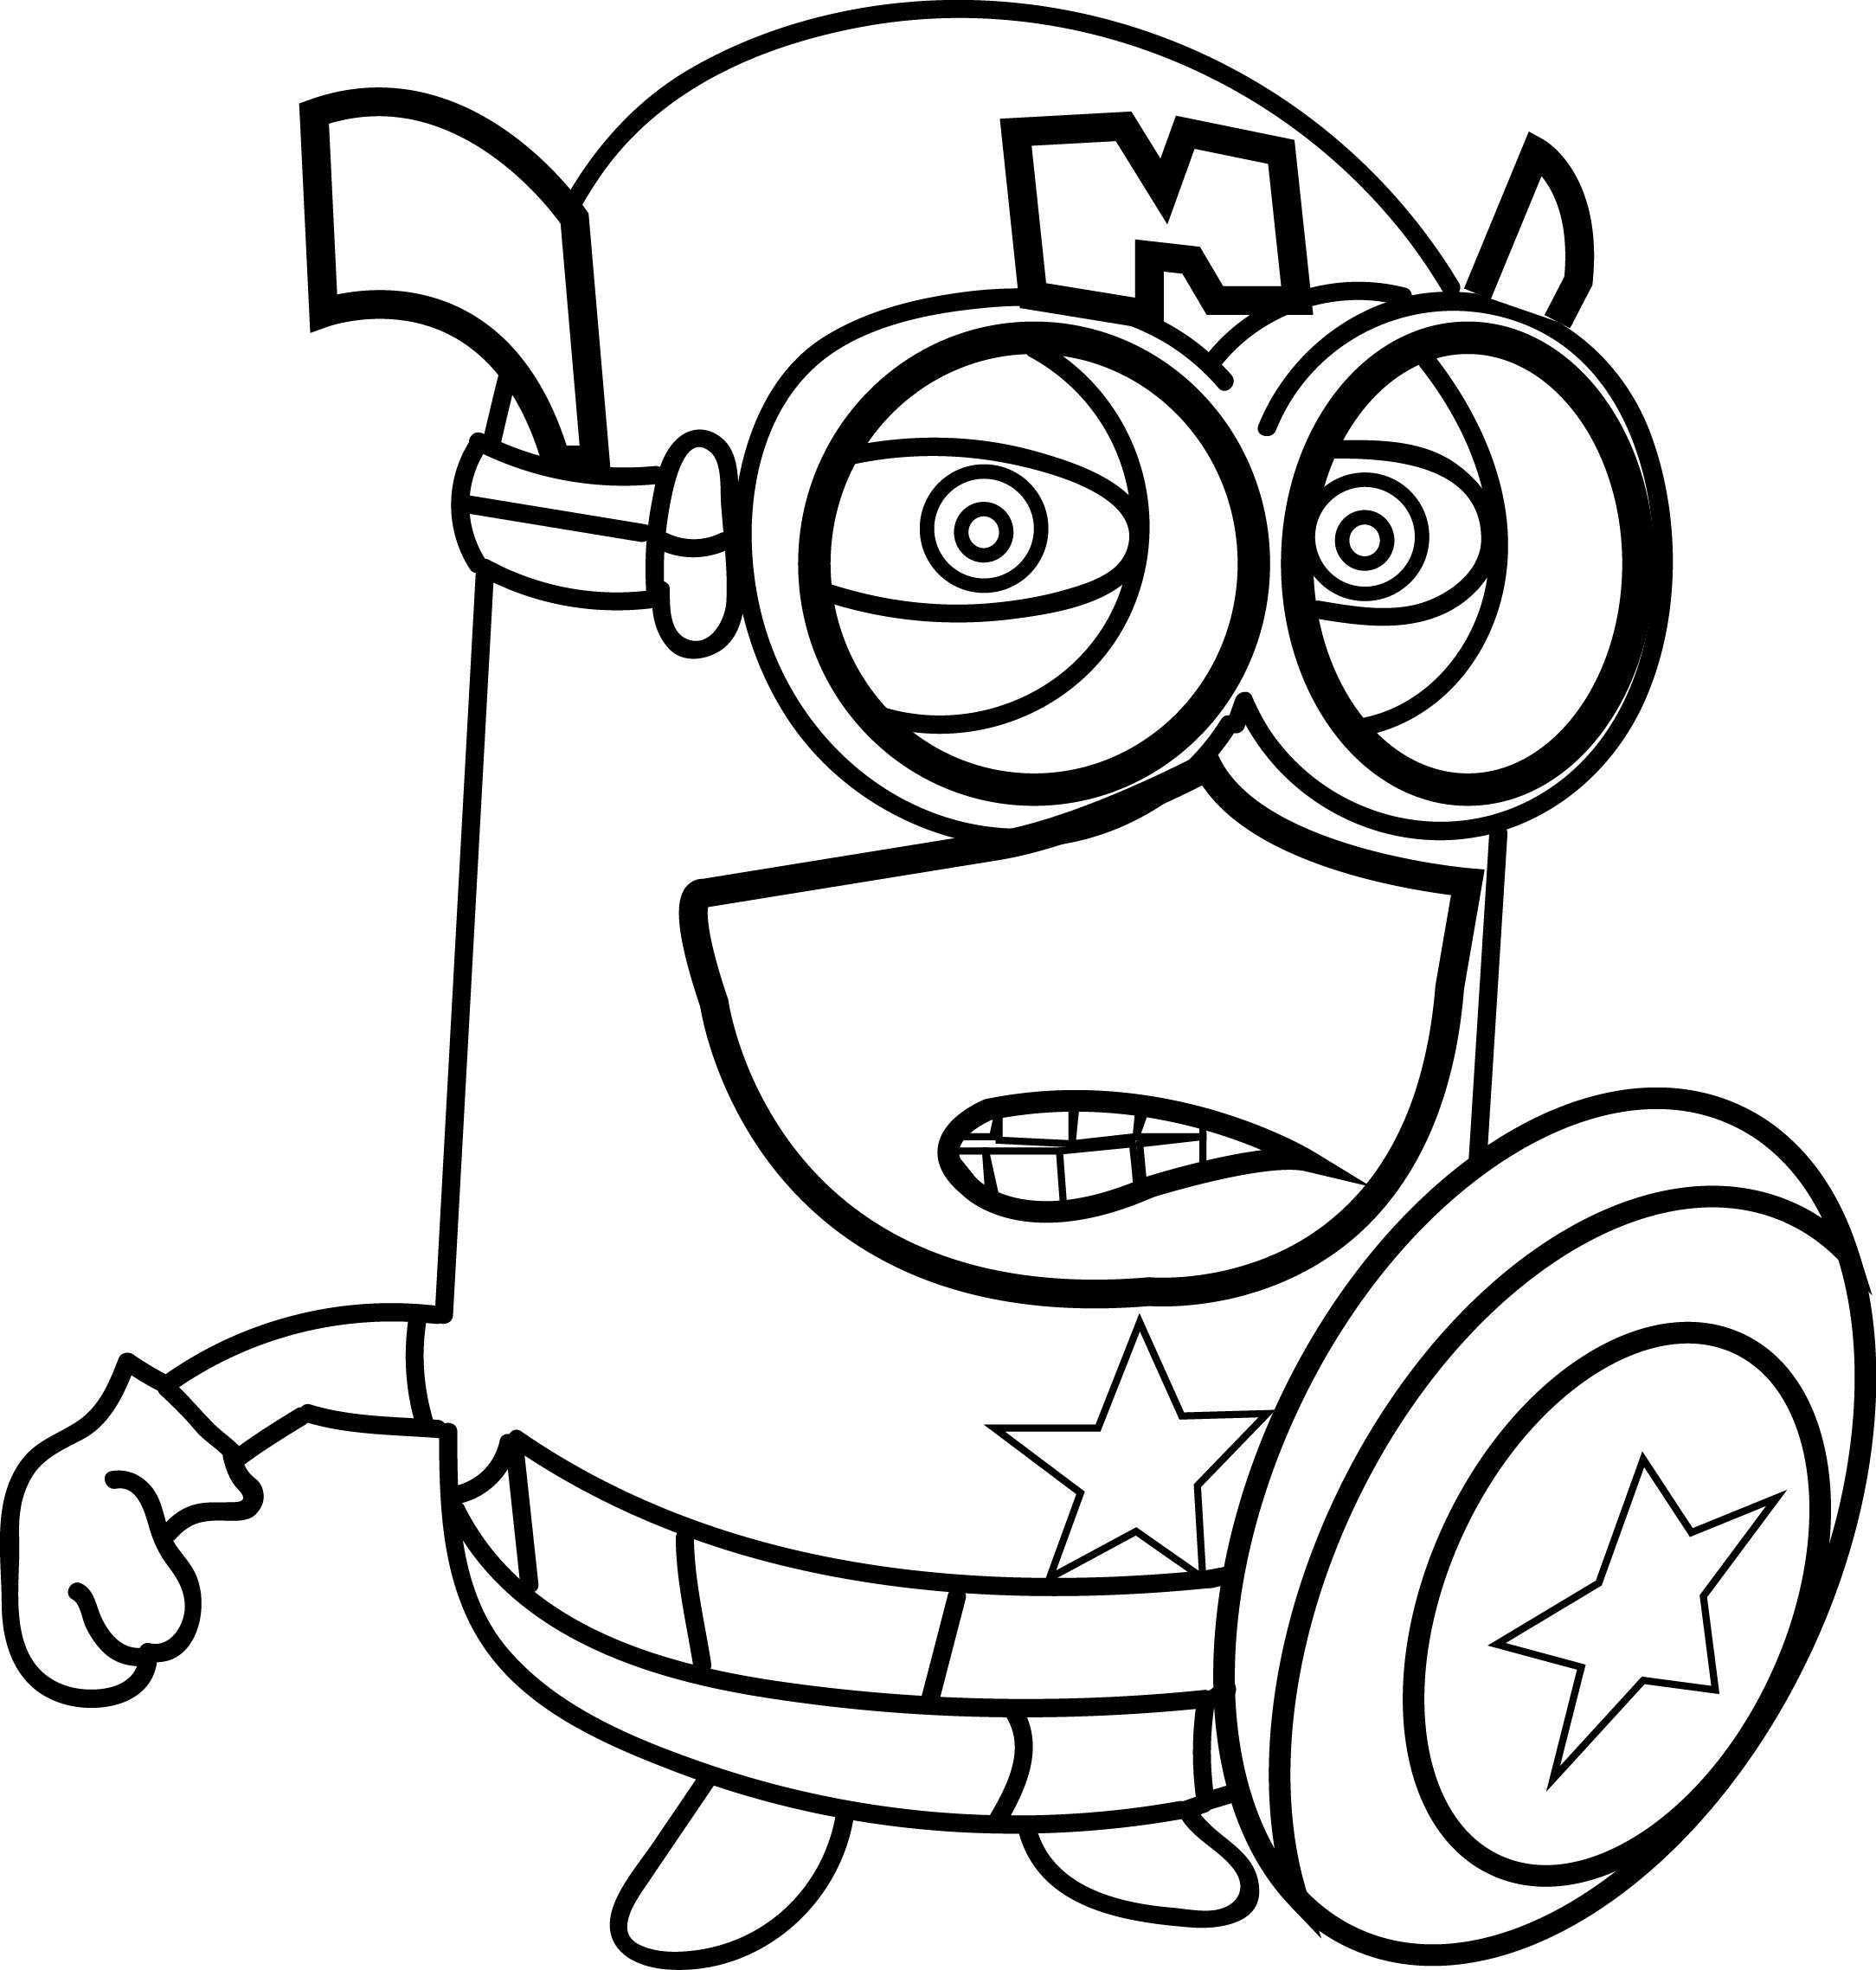 Captain America Minion Coloring Page   Free Printable Coloring Pages ...